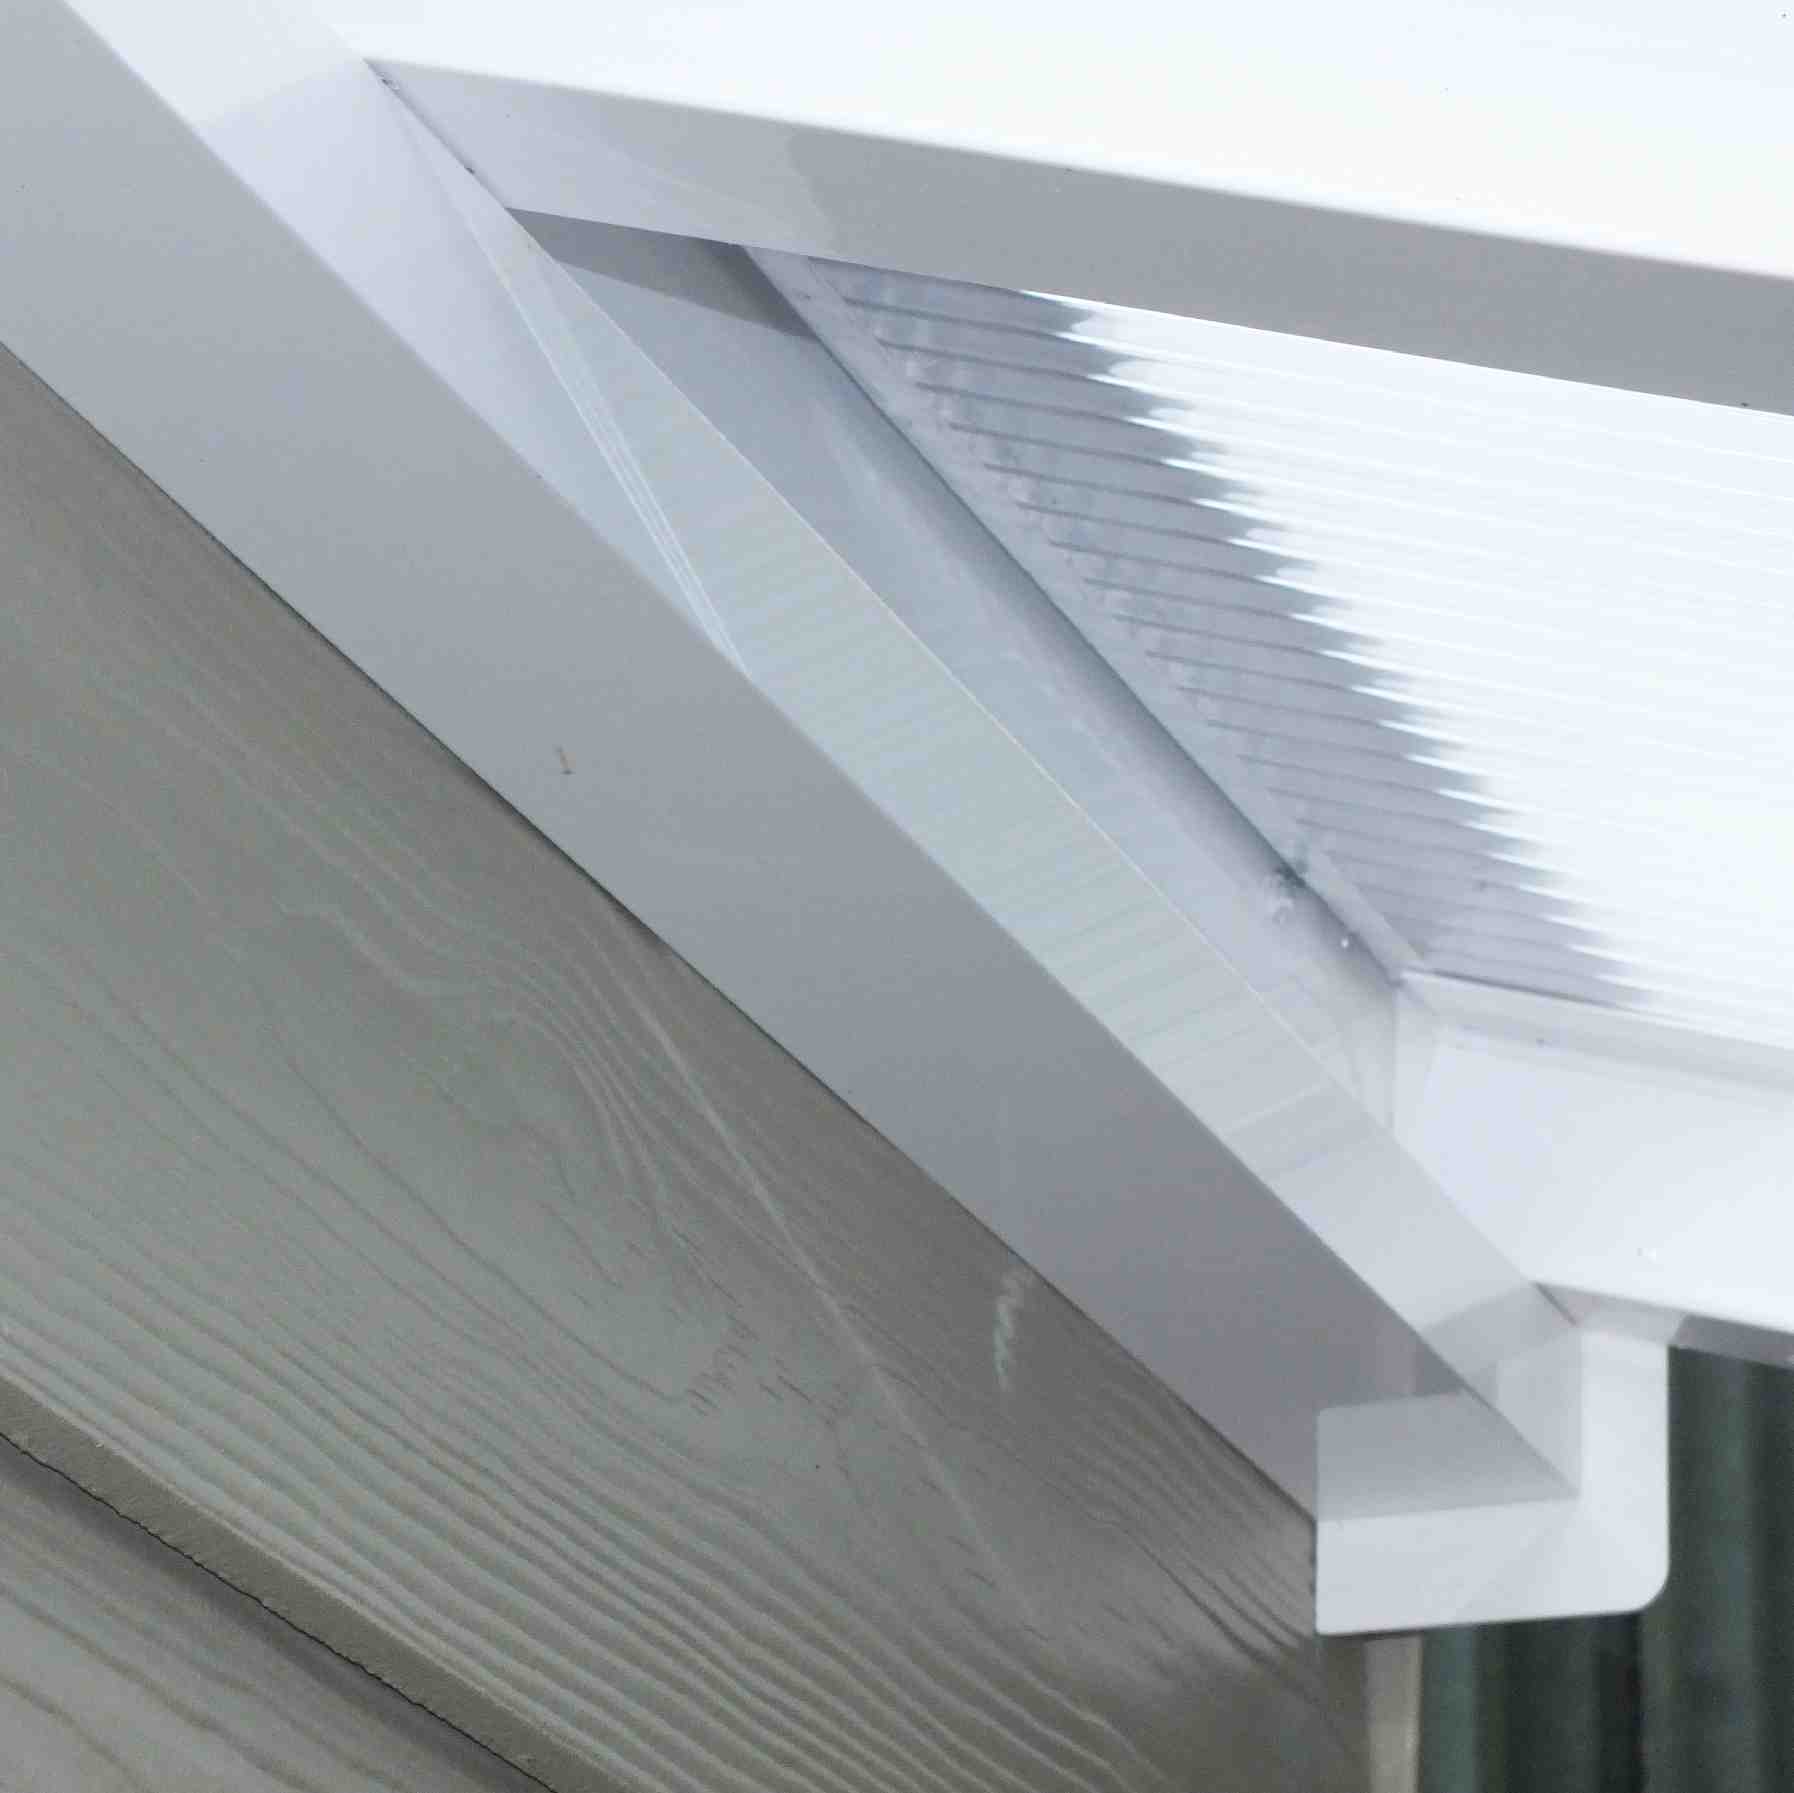 Great deals on Omega Verandah White with 6mm Glass Clear Plate Polycarbonate Glazing - 7.0m (W) x 2.5m (P), (4) Supporting Posts